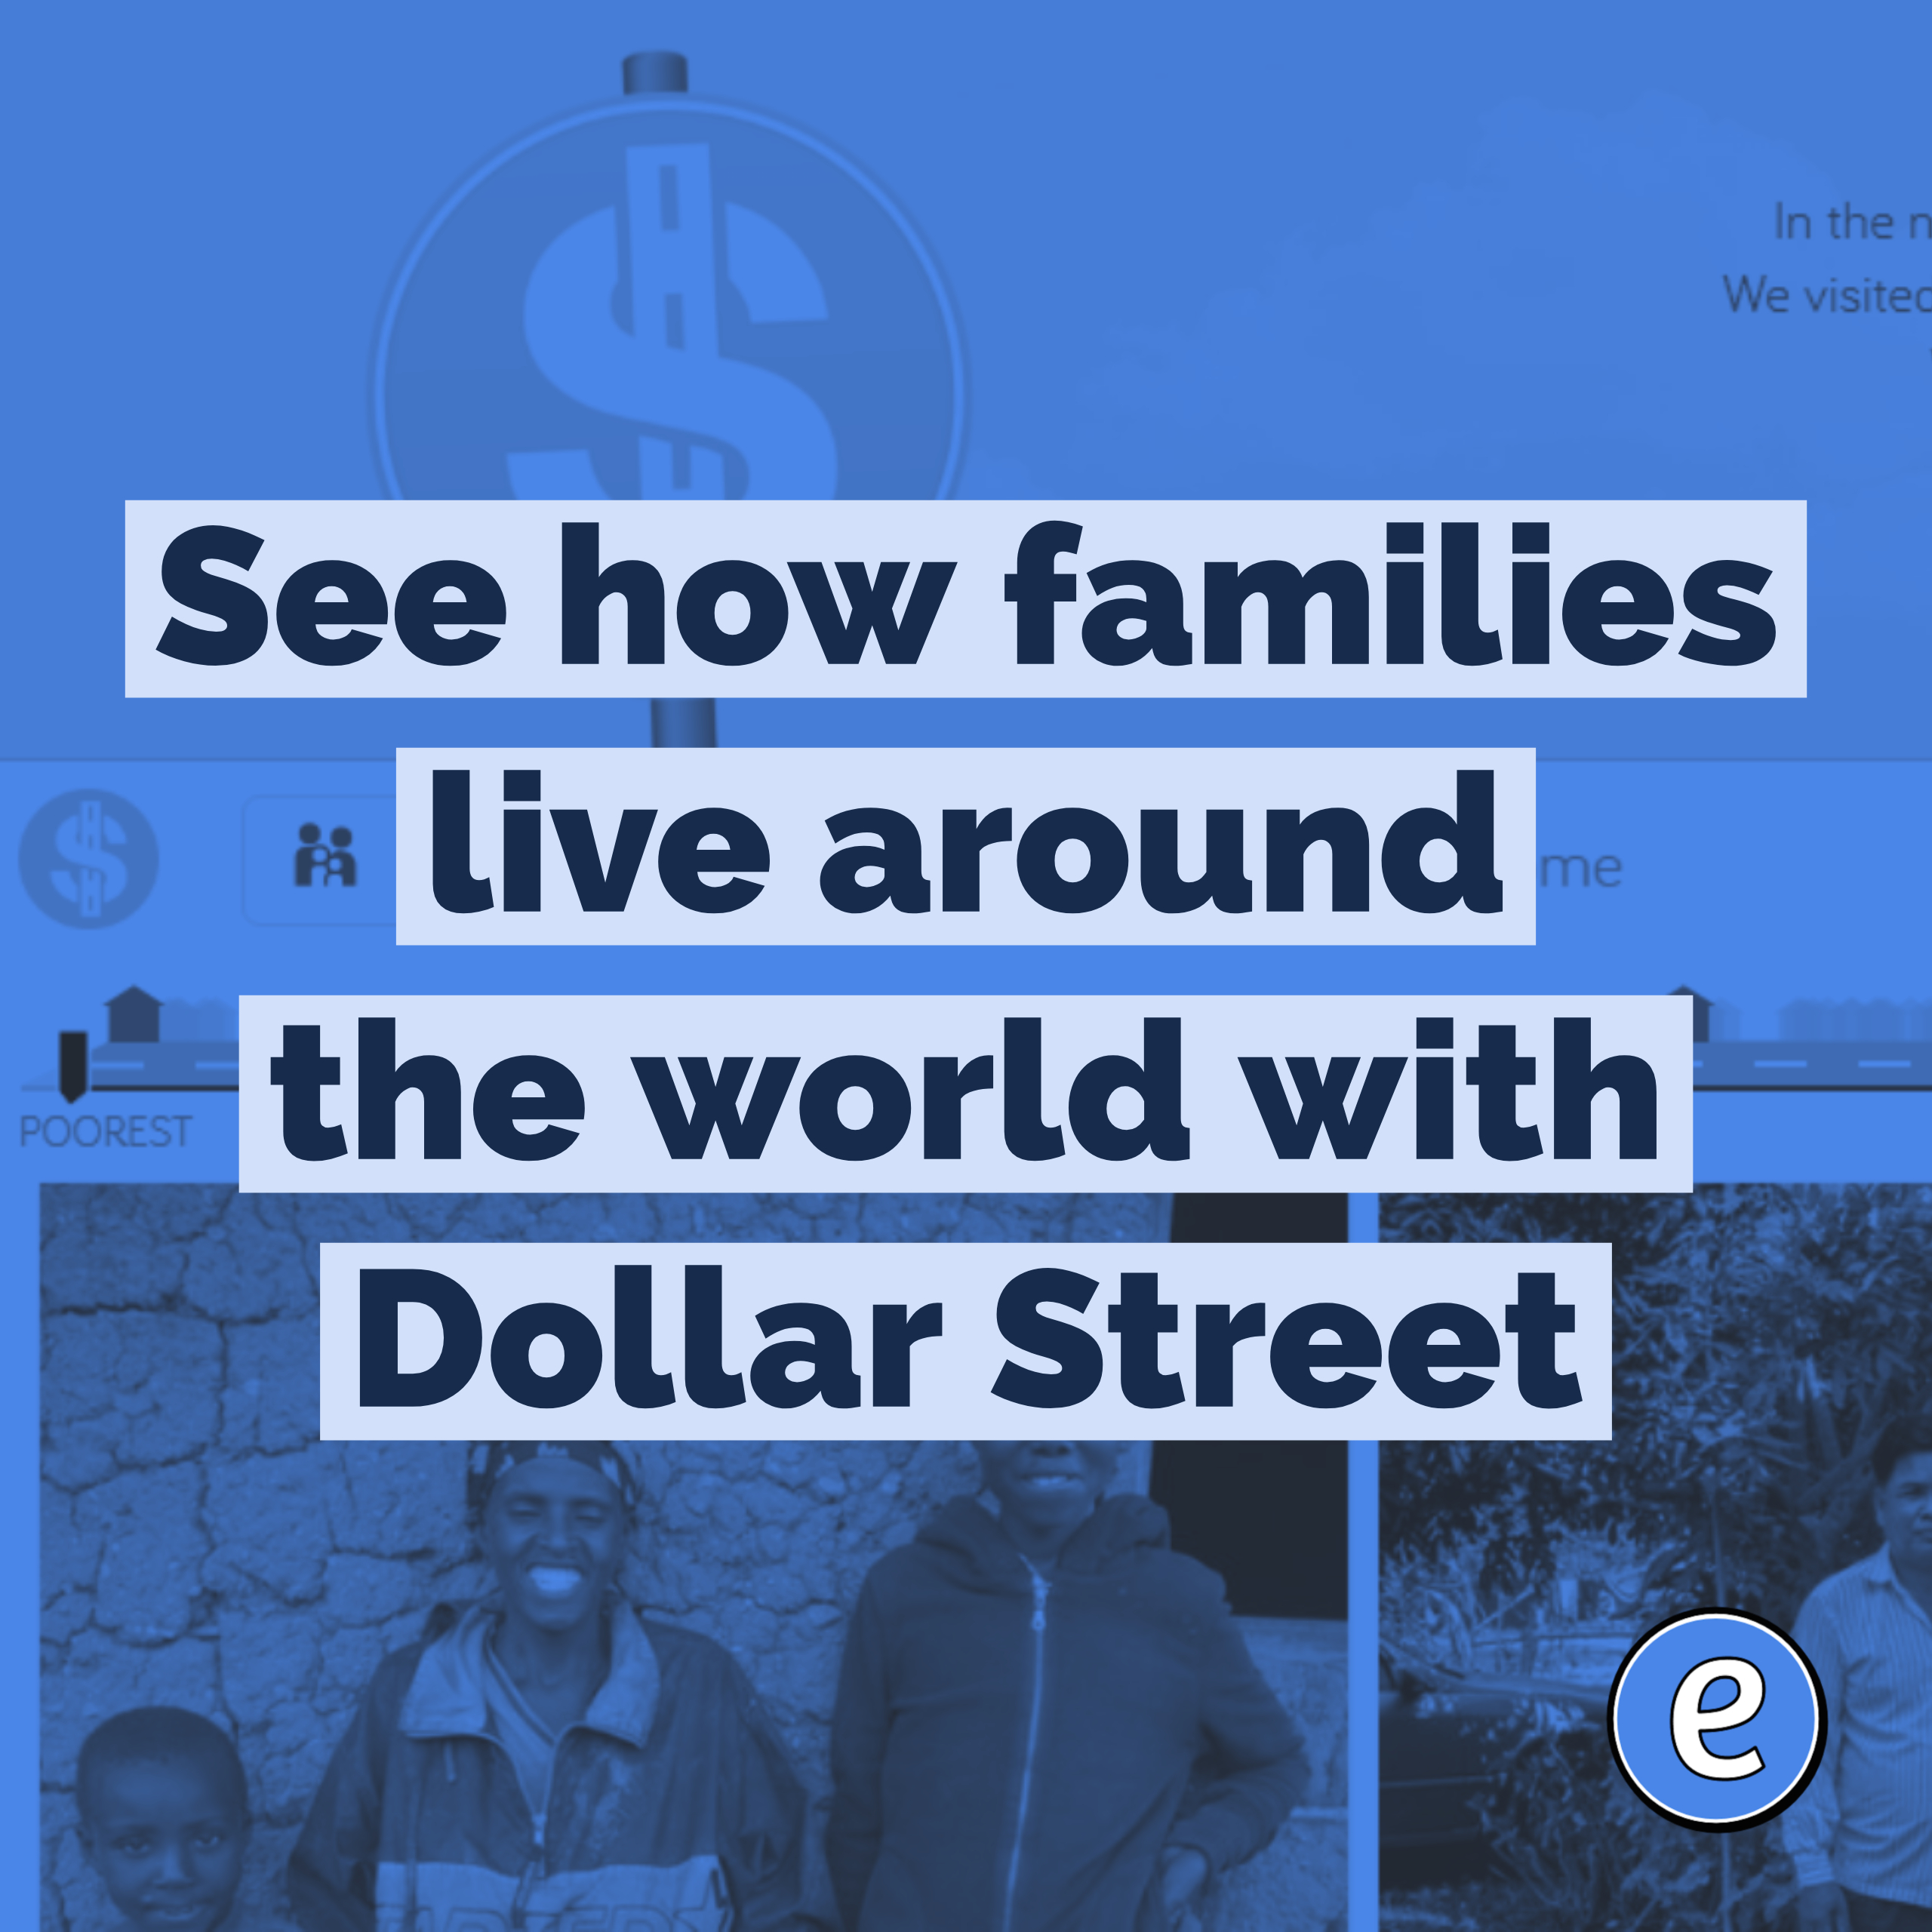 See how families live around the world with Dollar Street